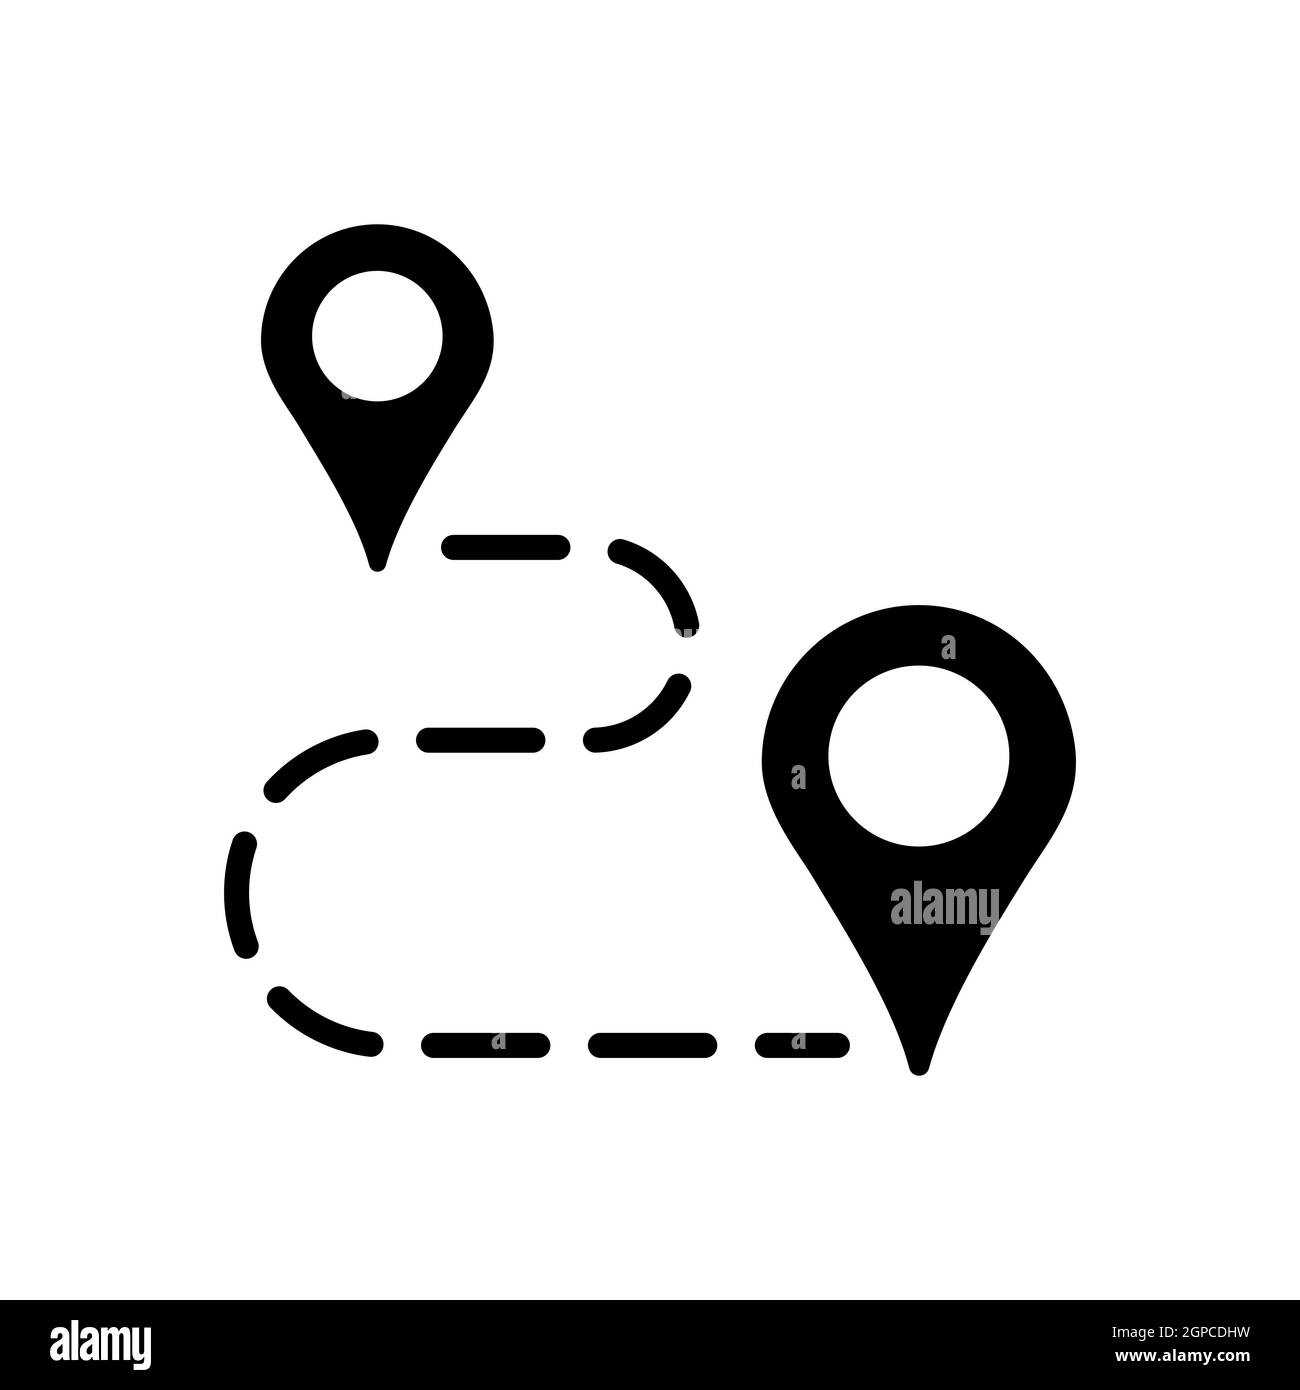 Route vector glyph icon. Navigation sign. Graph symbol for travel and tourism web site and apps design, logo, app, UI Stock Photo